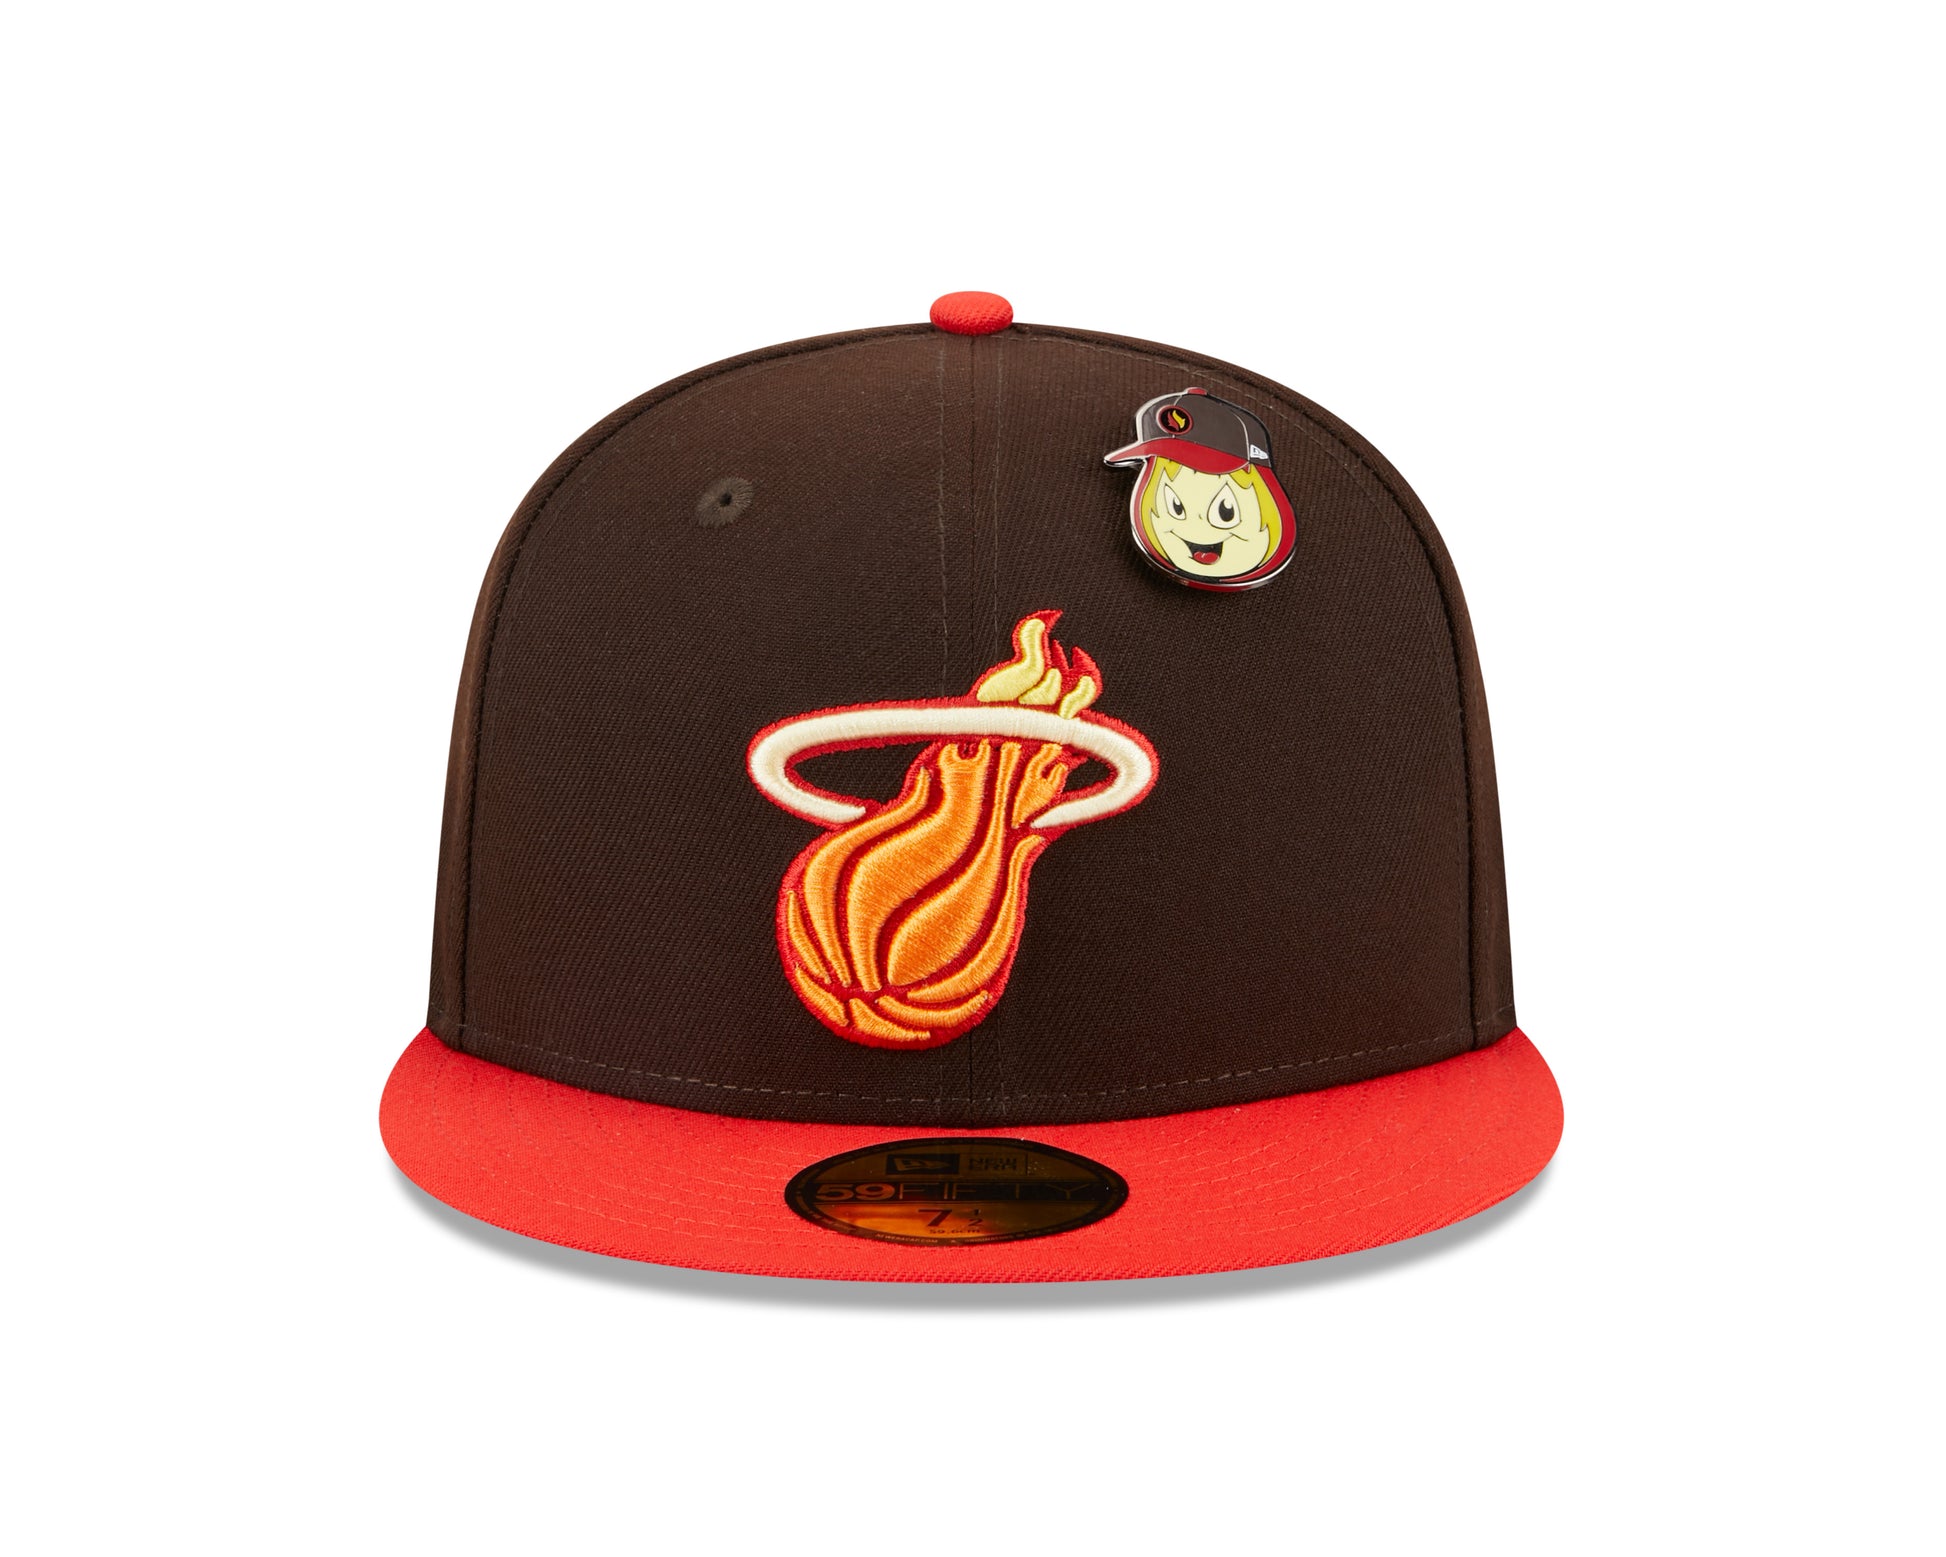 New Era 59fifty Fitted Cap Miami Heat THE ELEMENTS - Brown - Headz Up 